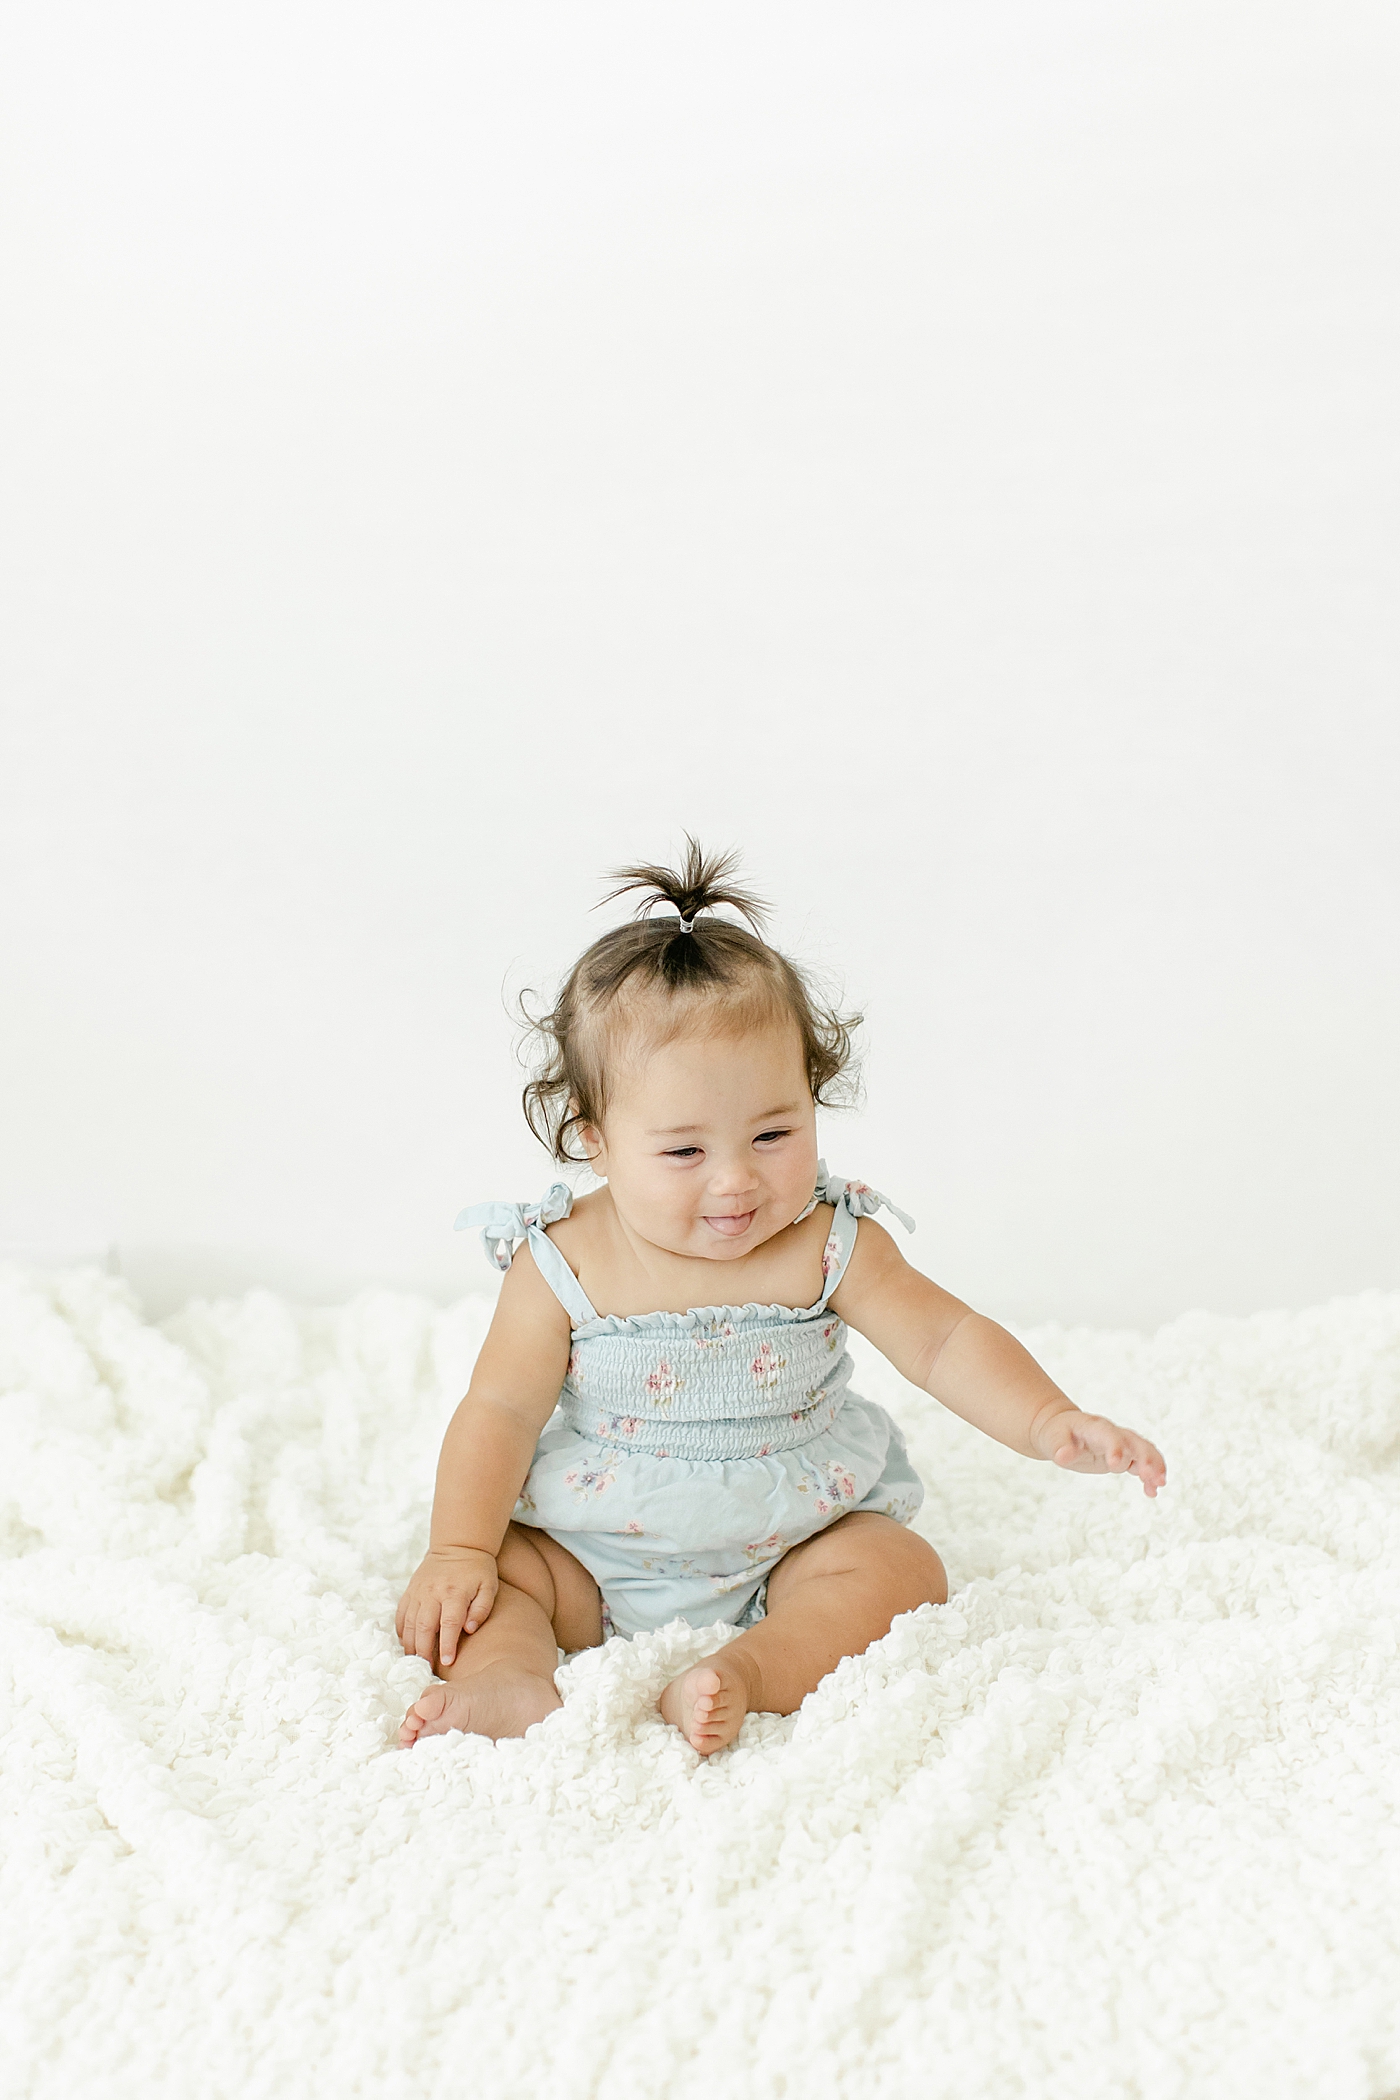 Baby girl sticking out her tongue | Image by Chrissy Winchester Photography